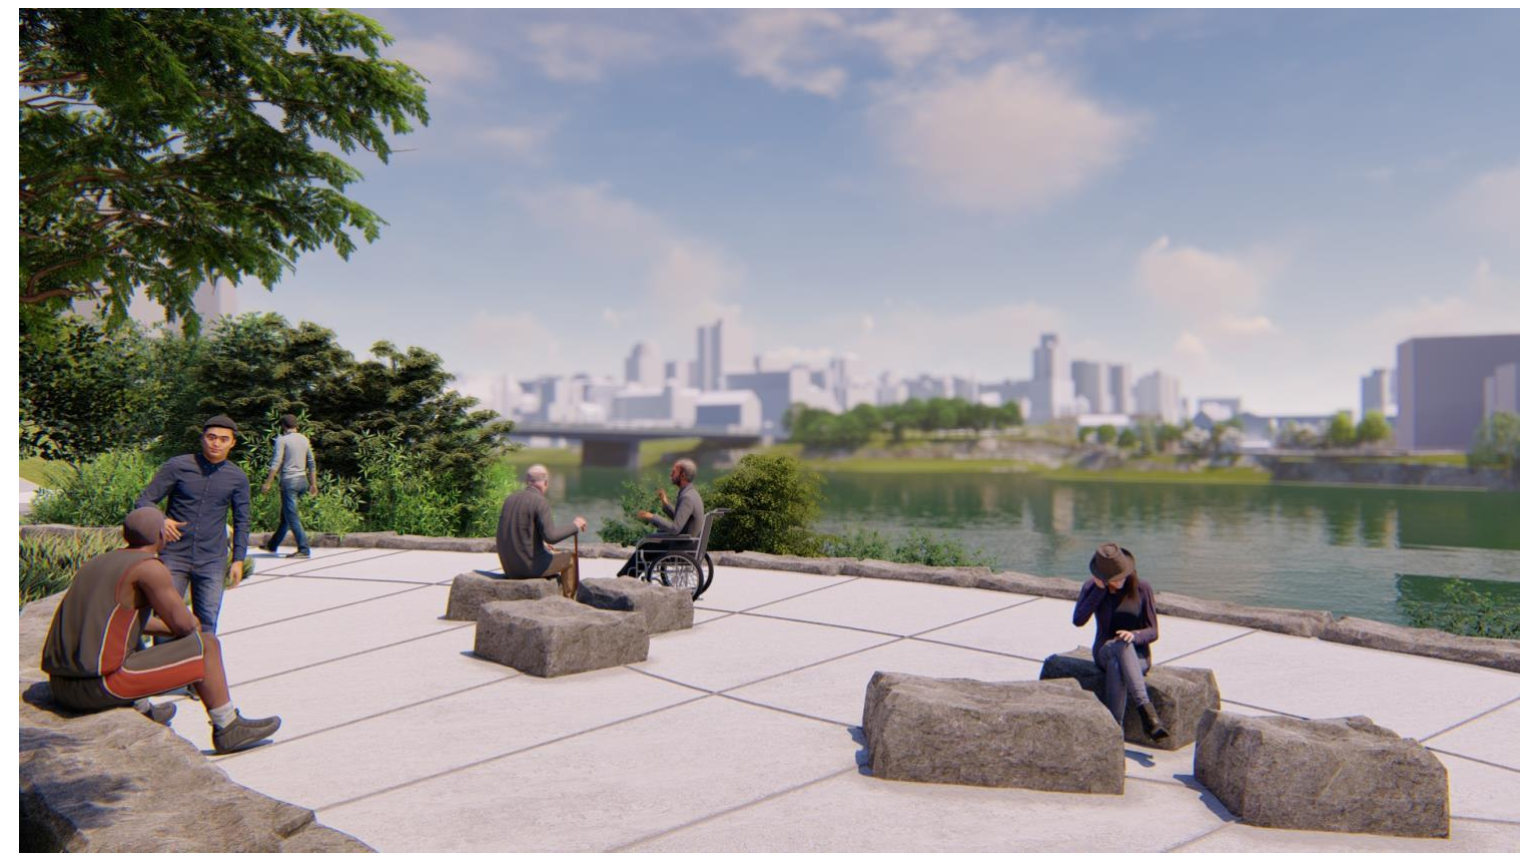 Rendering of the universally accessible pathway.